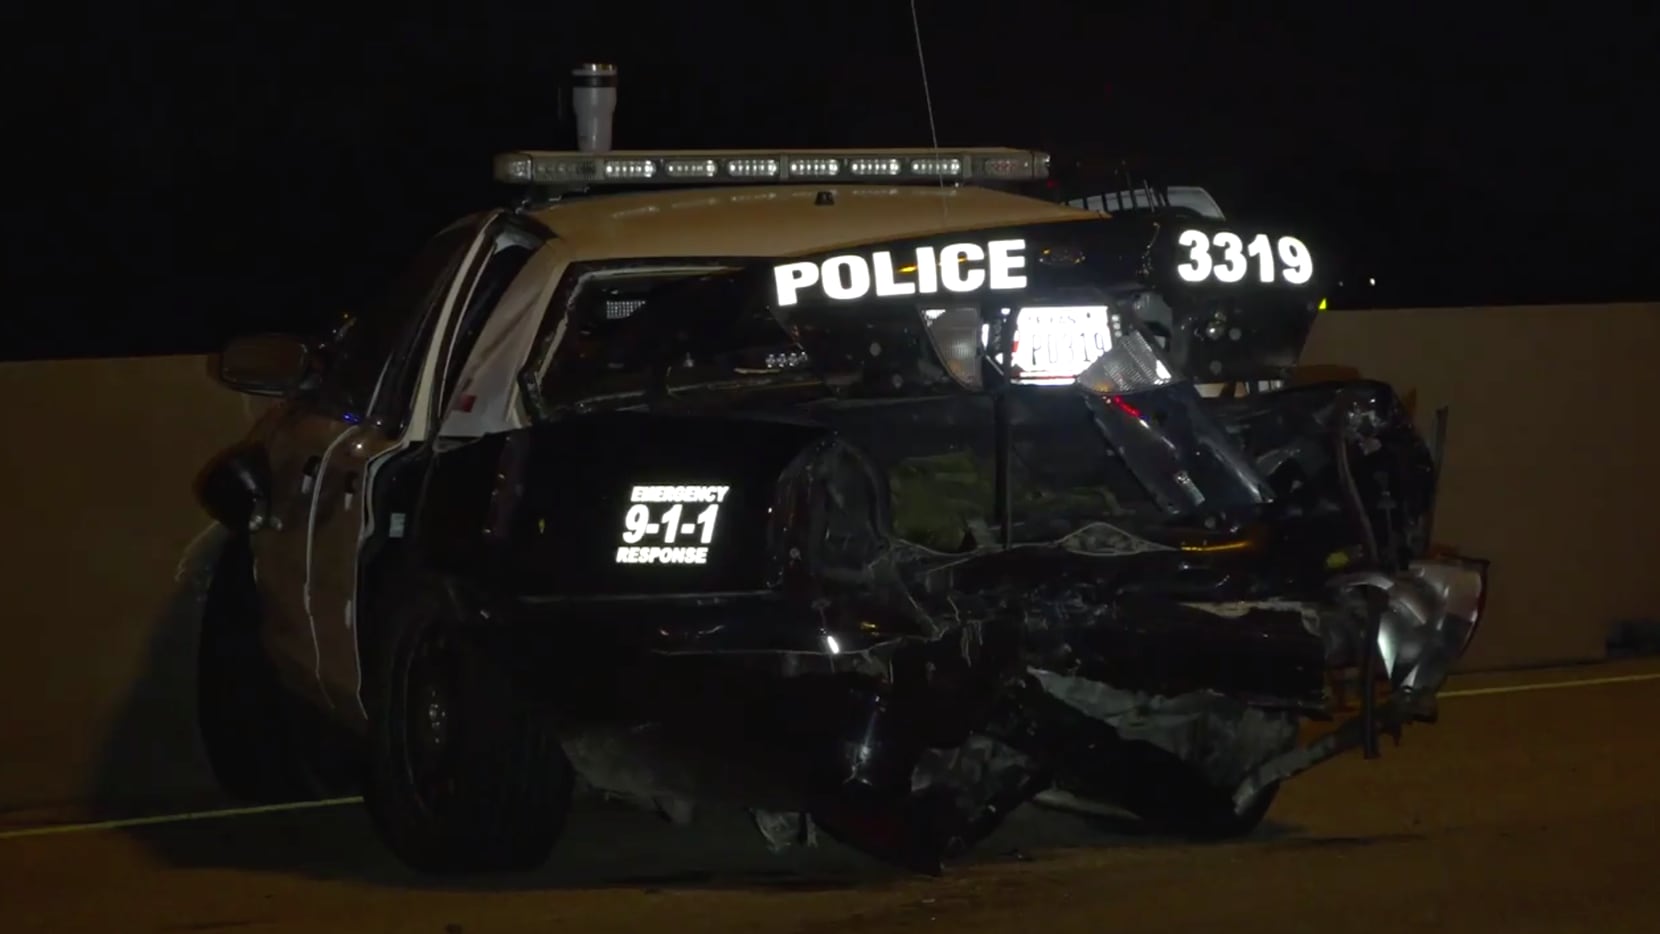 An Edgewood police officer was hospitalized after a Maserati rammed into his squad car where he was working off-duty early Friday.